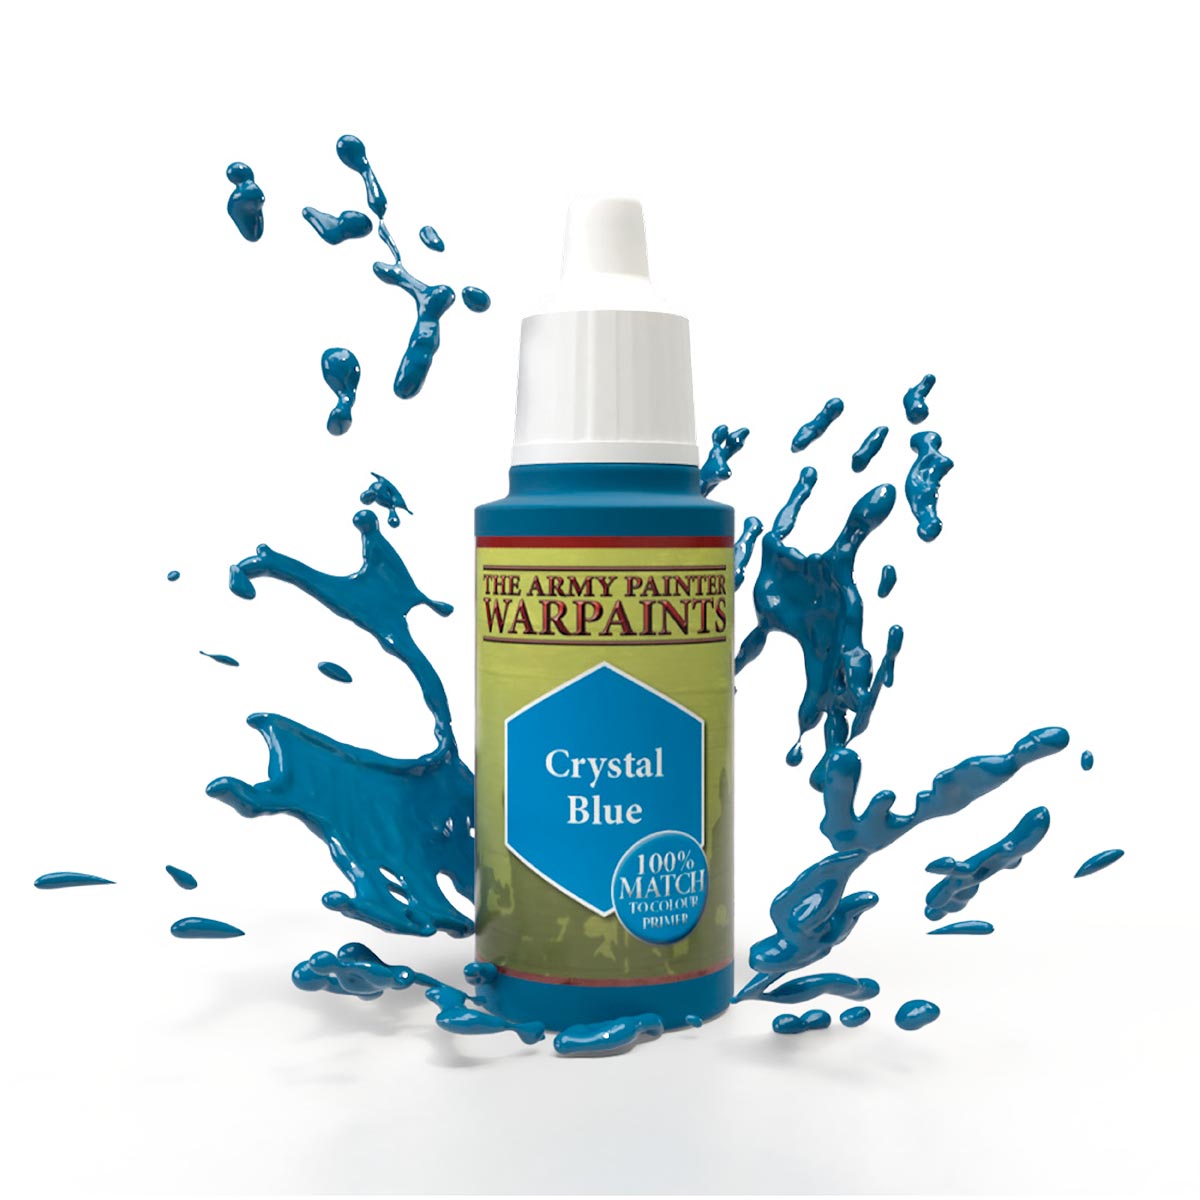 Warpaints Crystall Blue